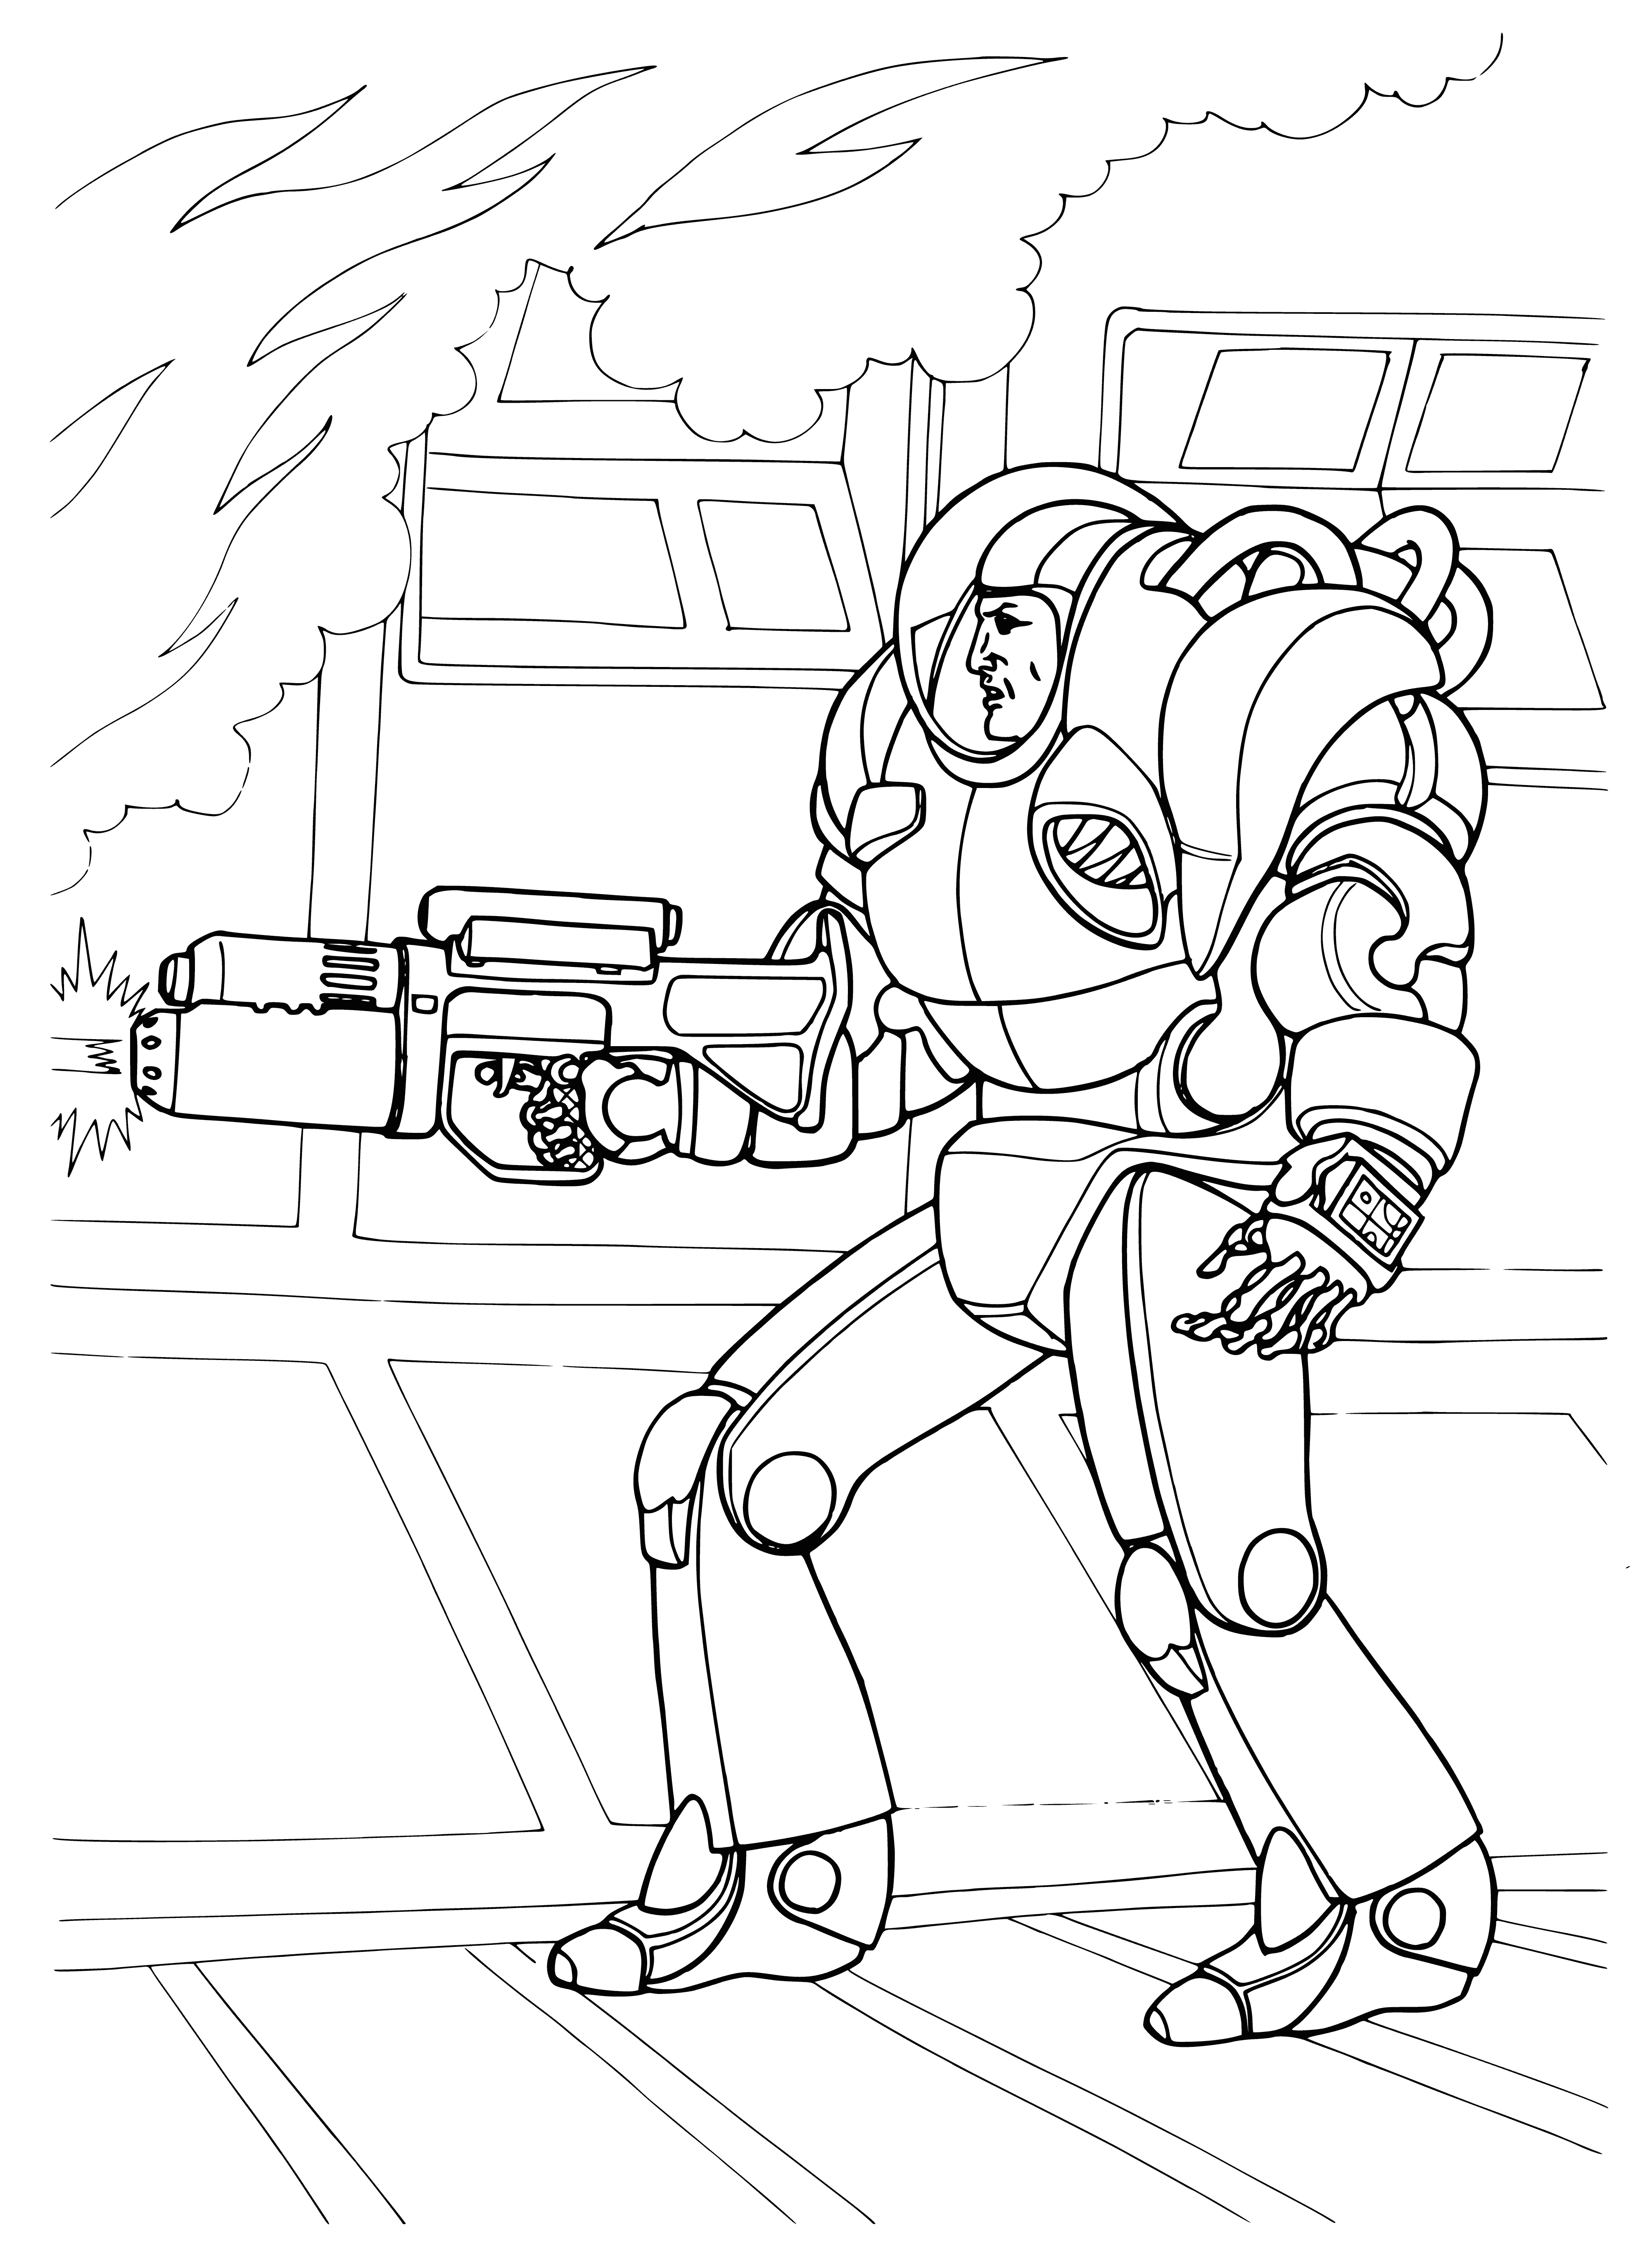 coloring page: Wars of the future fought w/ private armies of mercenaries for control of resources & territory; highest bidder wins.